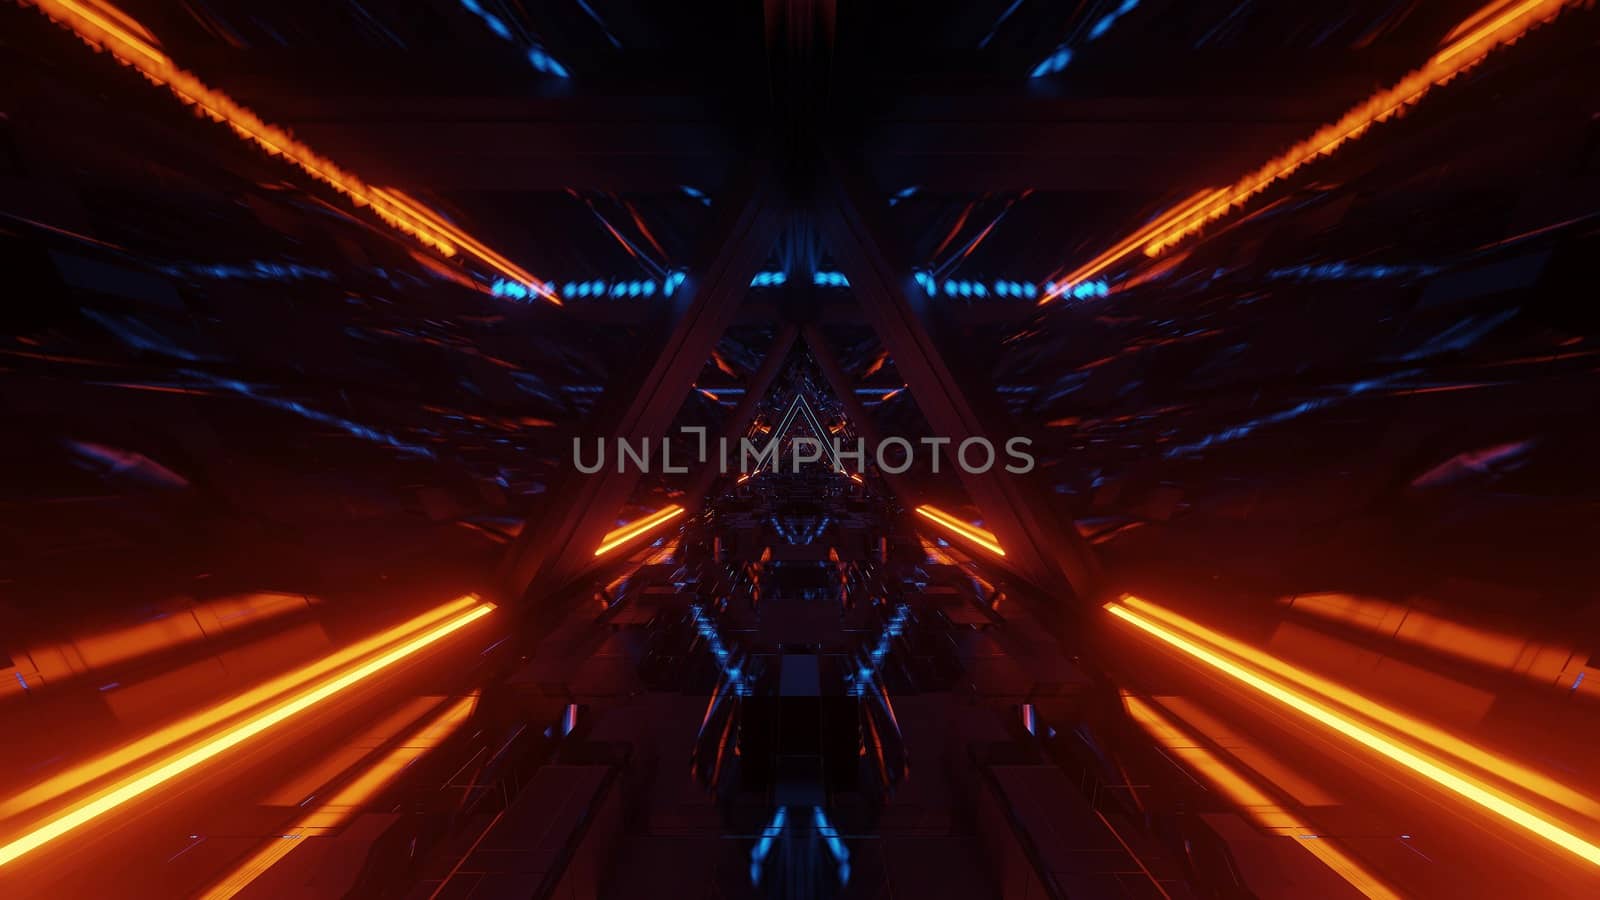 technical triangle space ship hangar tunnel corridor with glass windows 3d illustrations graphics artworks background wallpaper by tunnelmotions